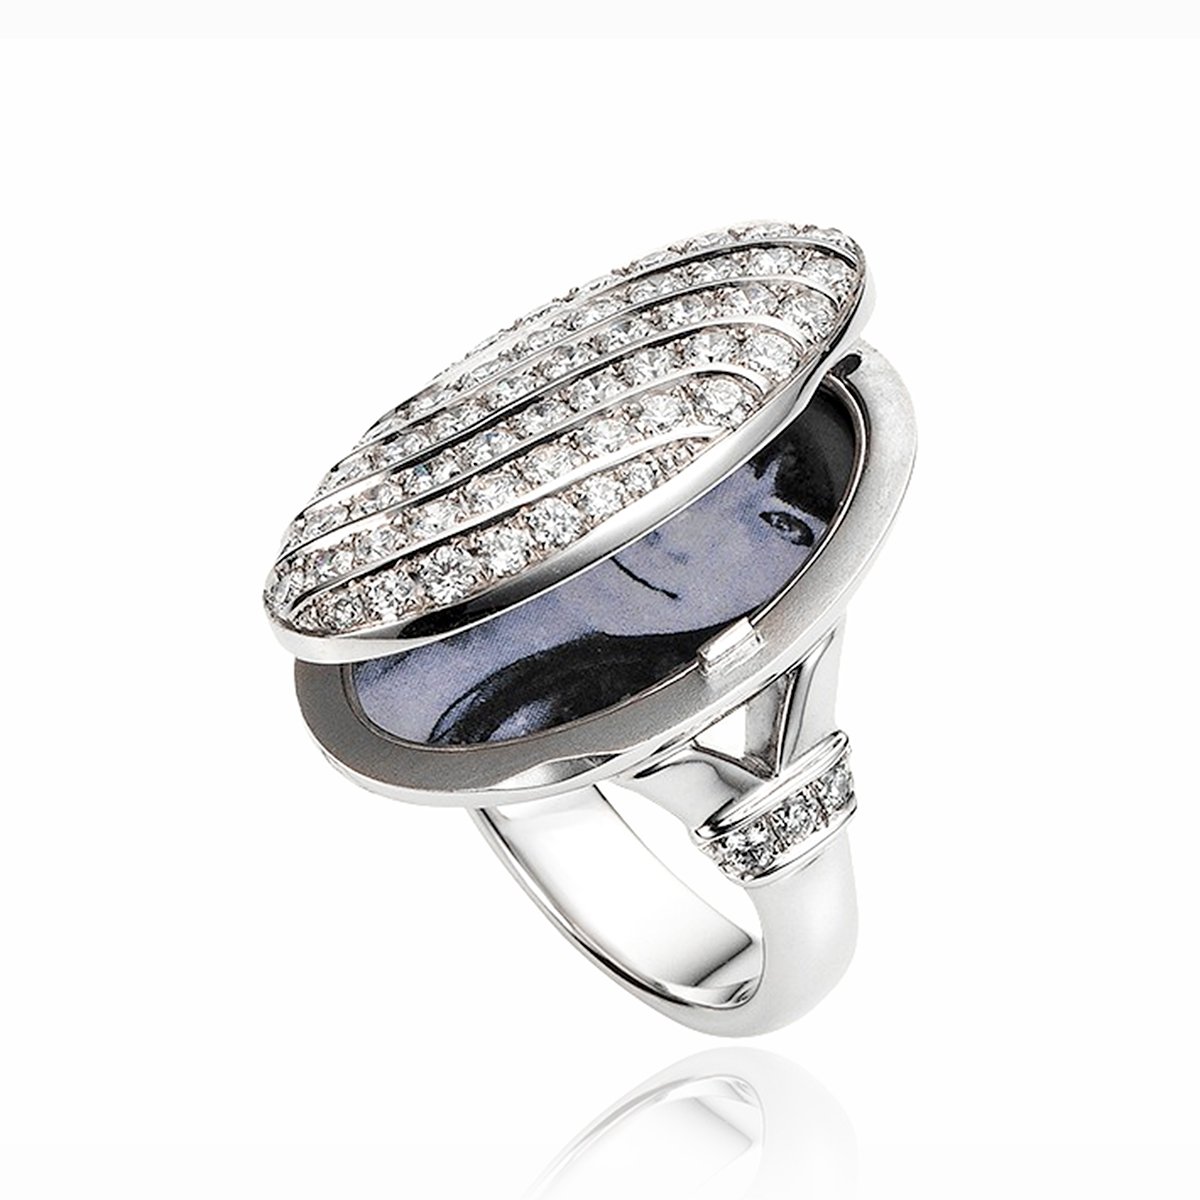 An ope view of an 18 ct white gold oval locket ring pave set with diamonds. There are also diamonds set across the shank.